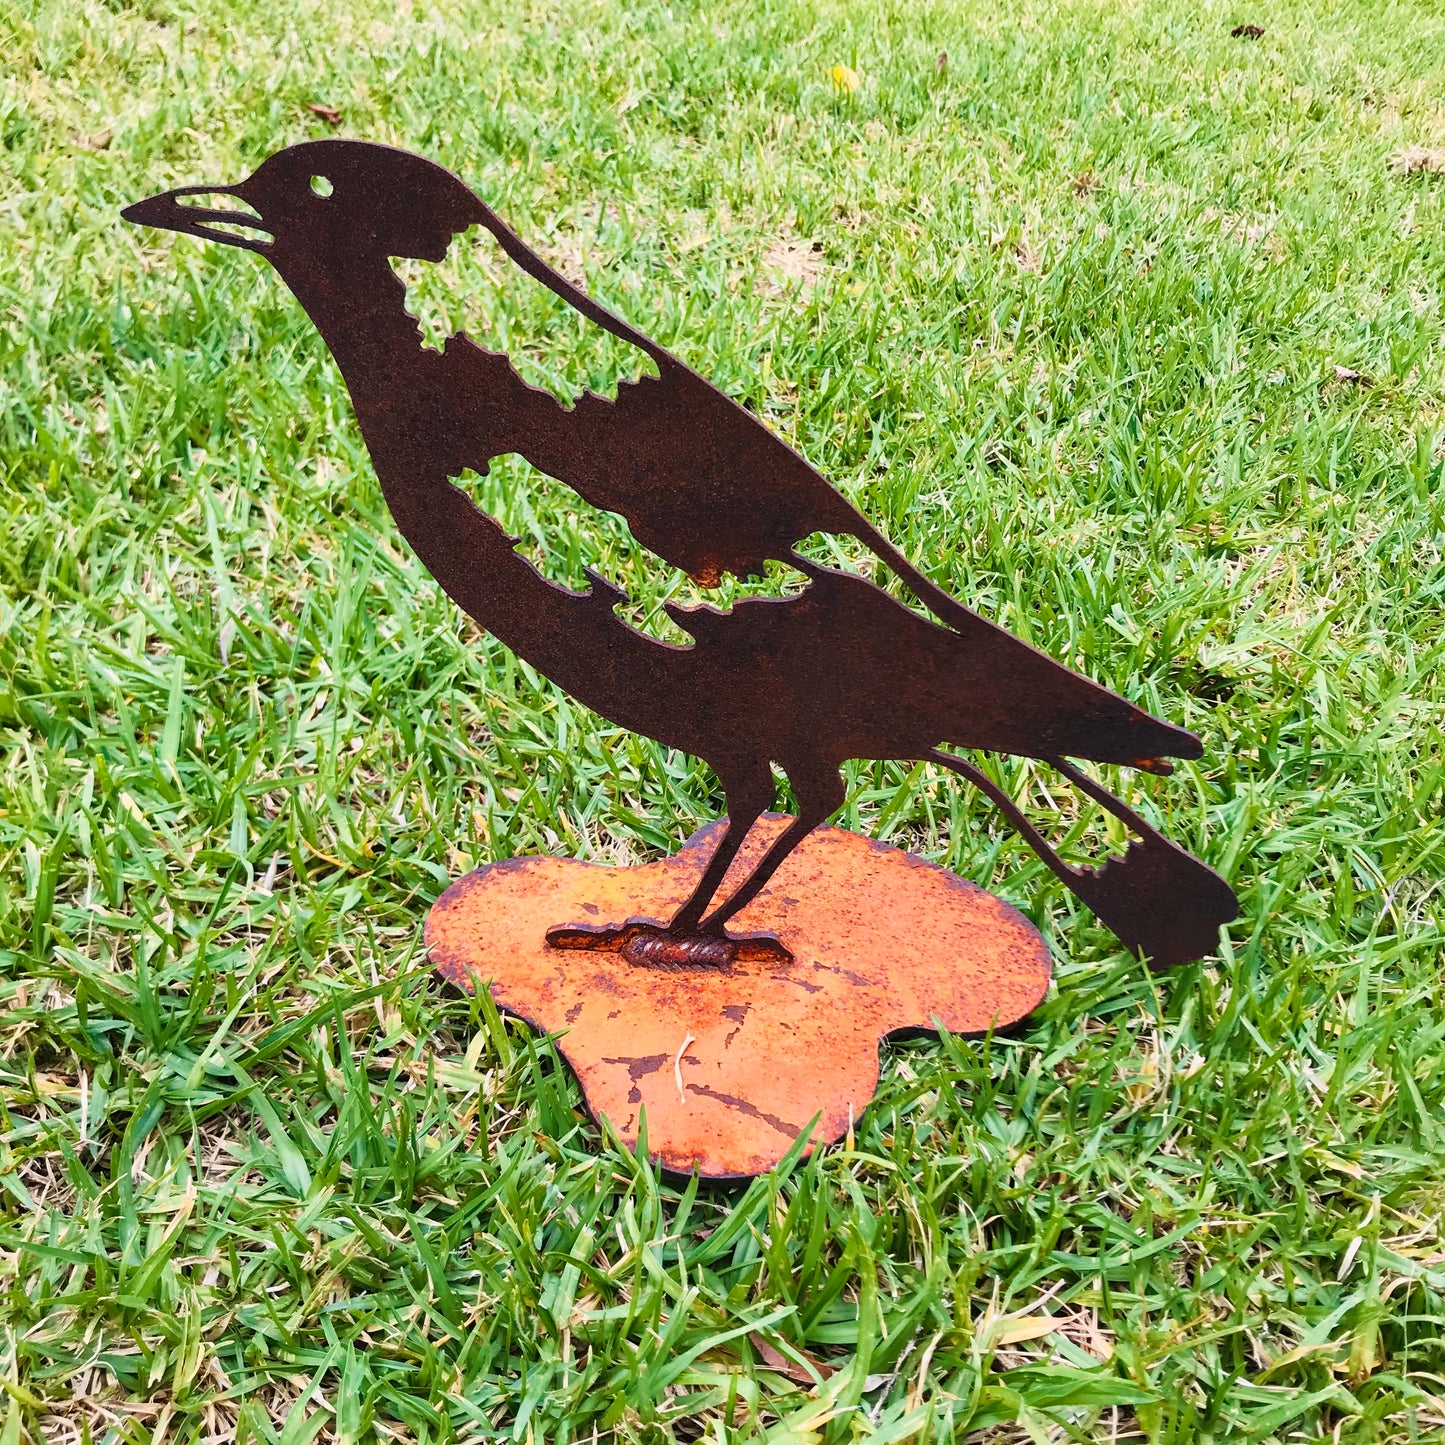 Overwrought Magpie Looking Forward Stand